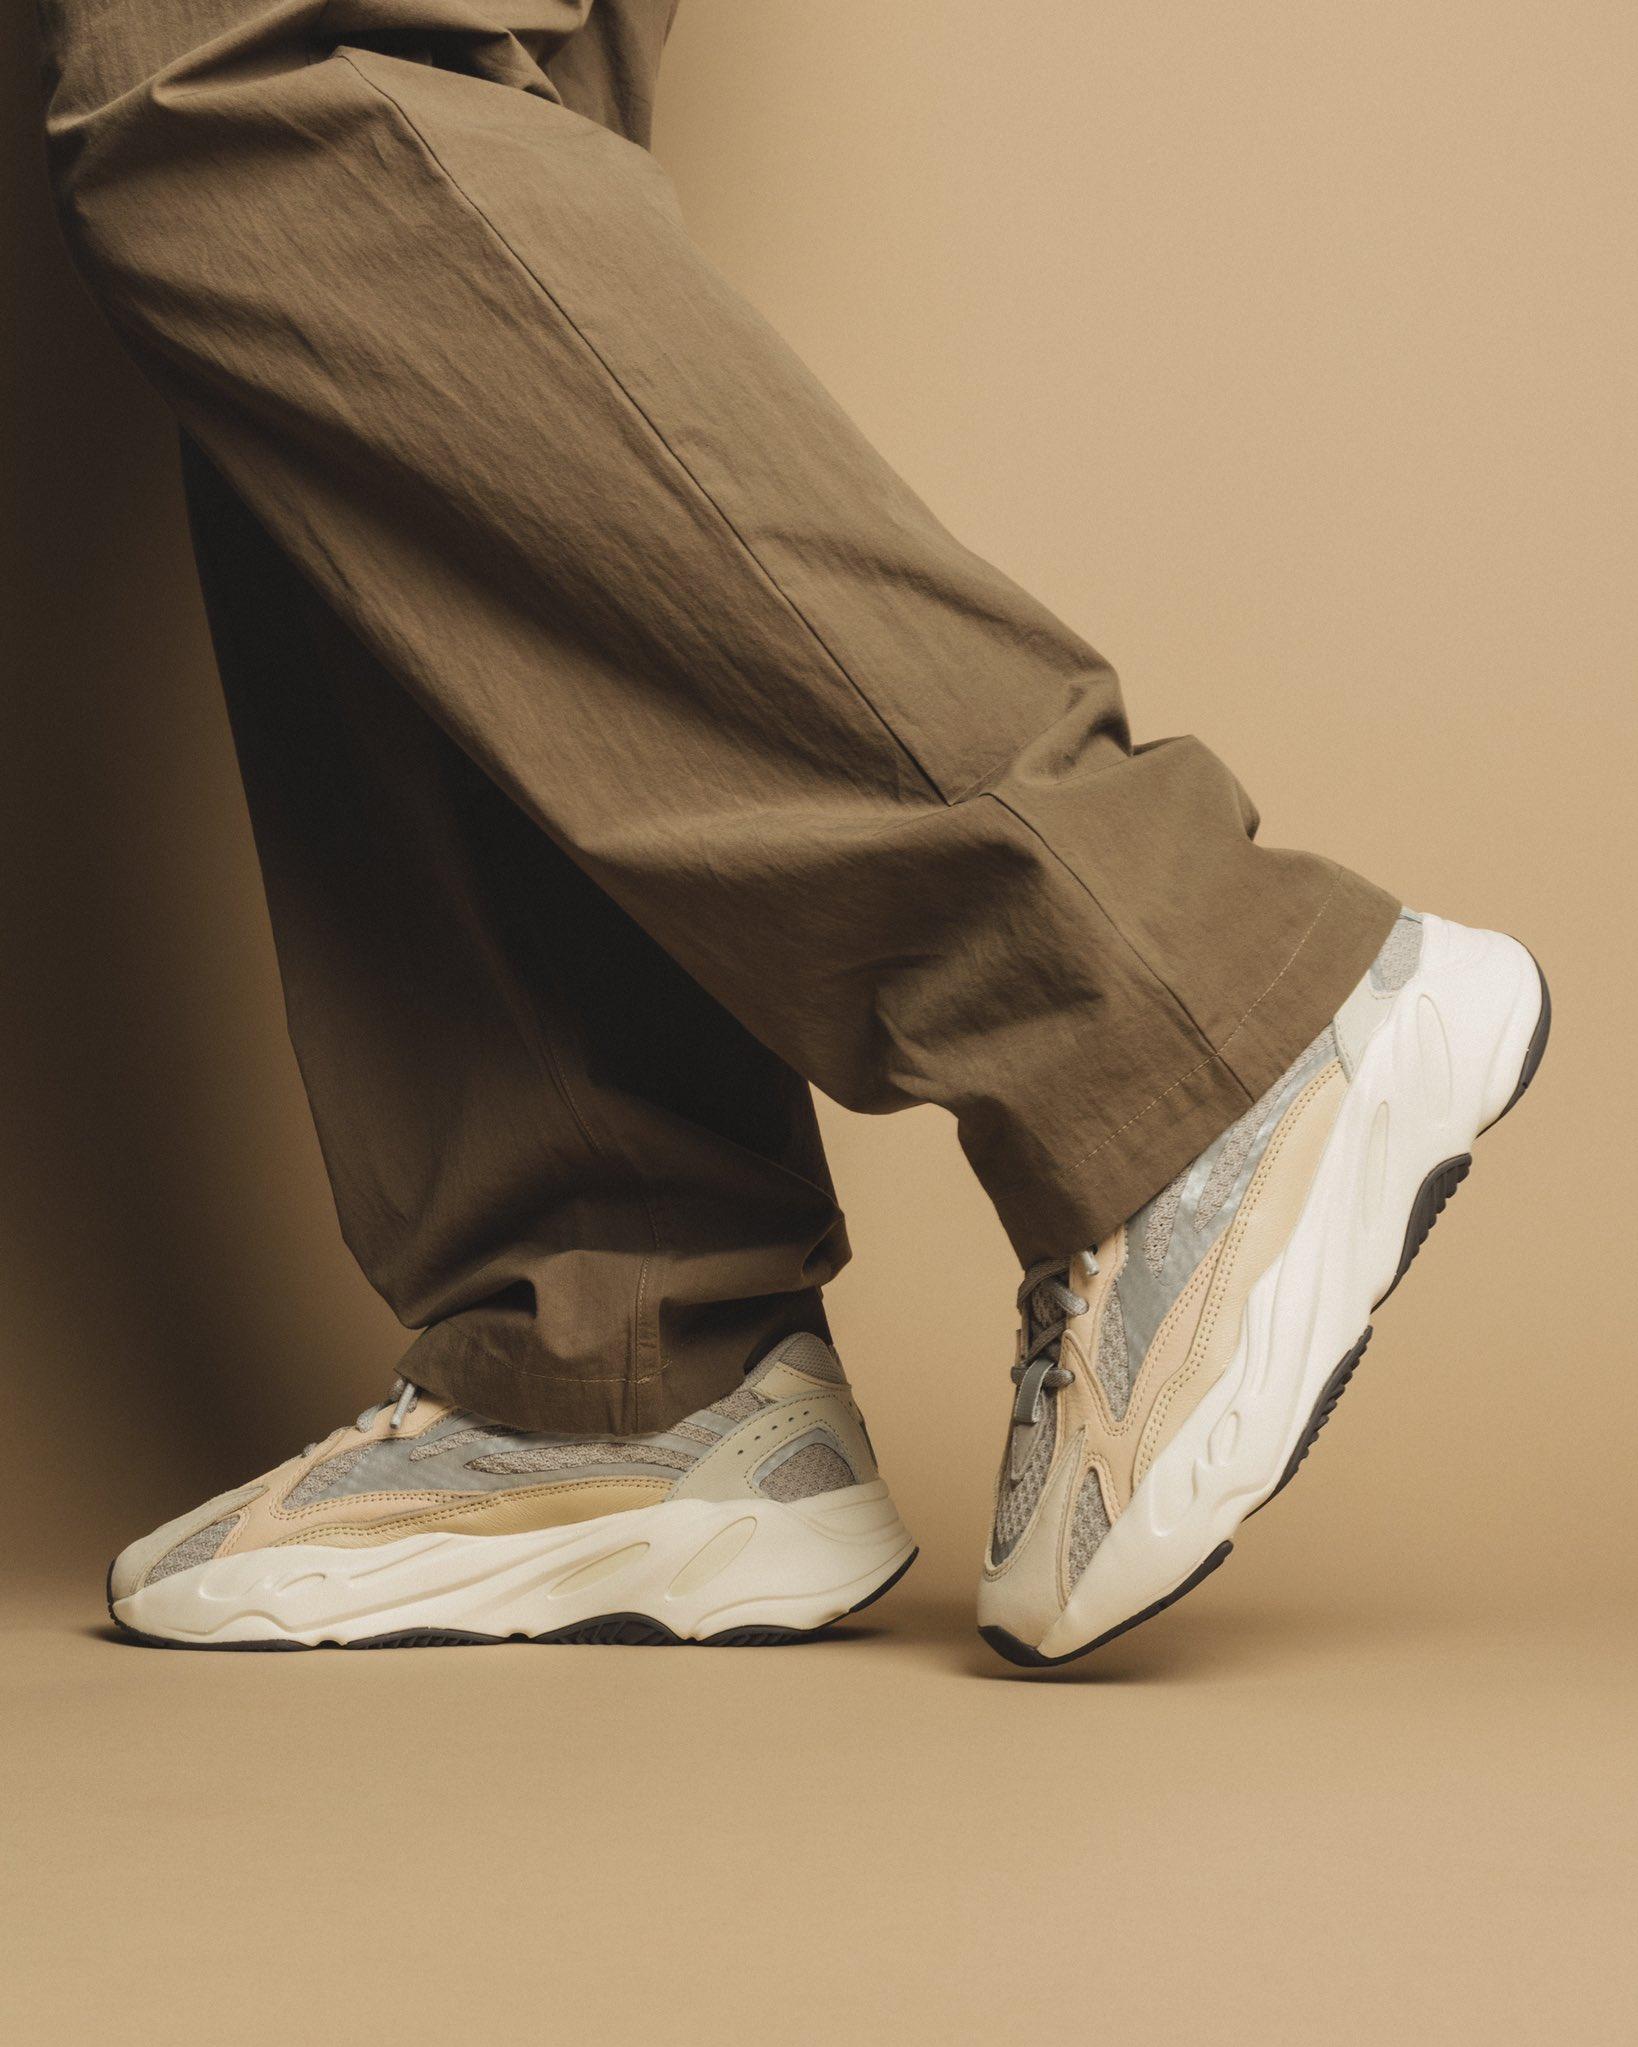 Packer On X Adidas Yeezy Boost 700v2 Cream Available